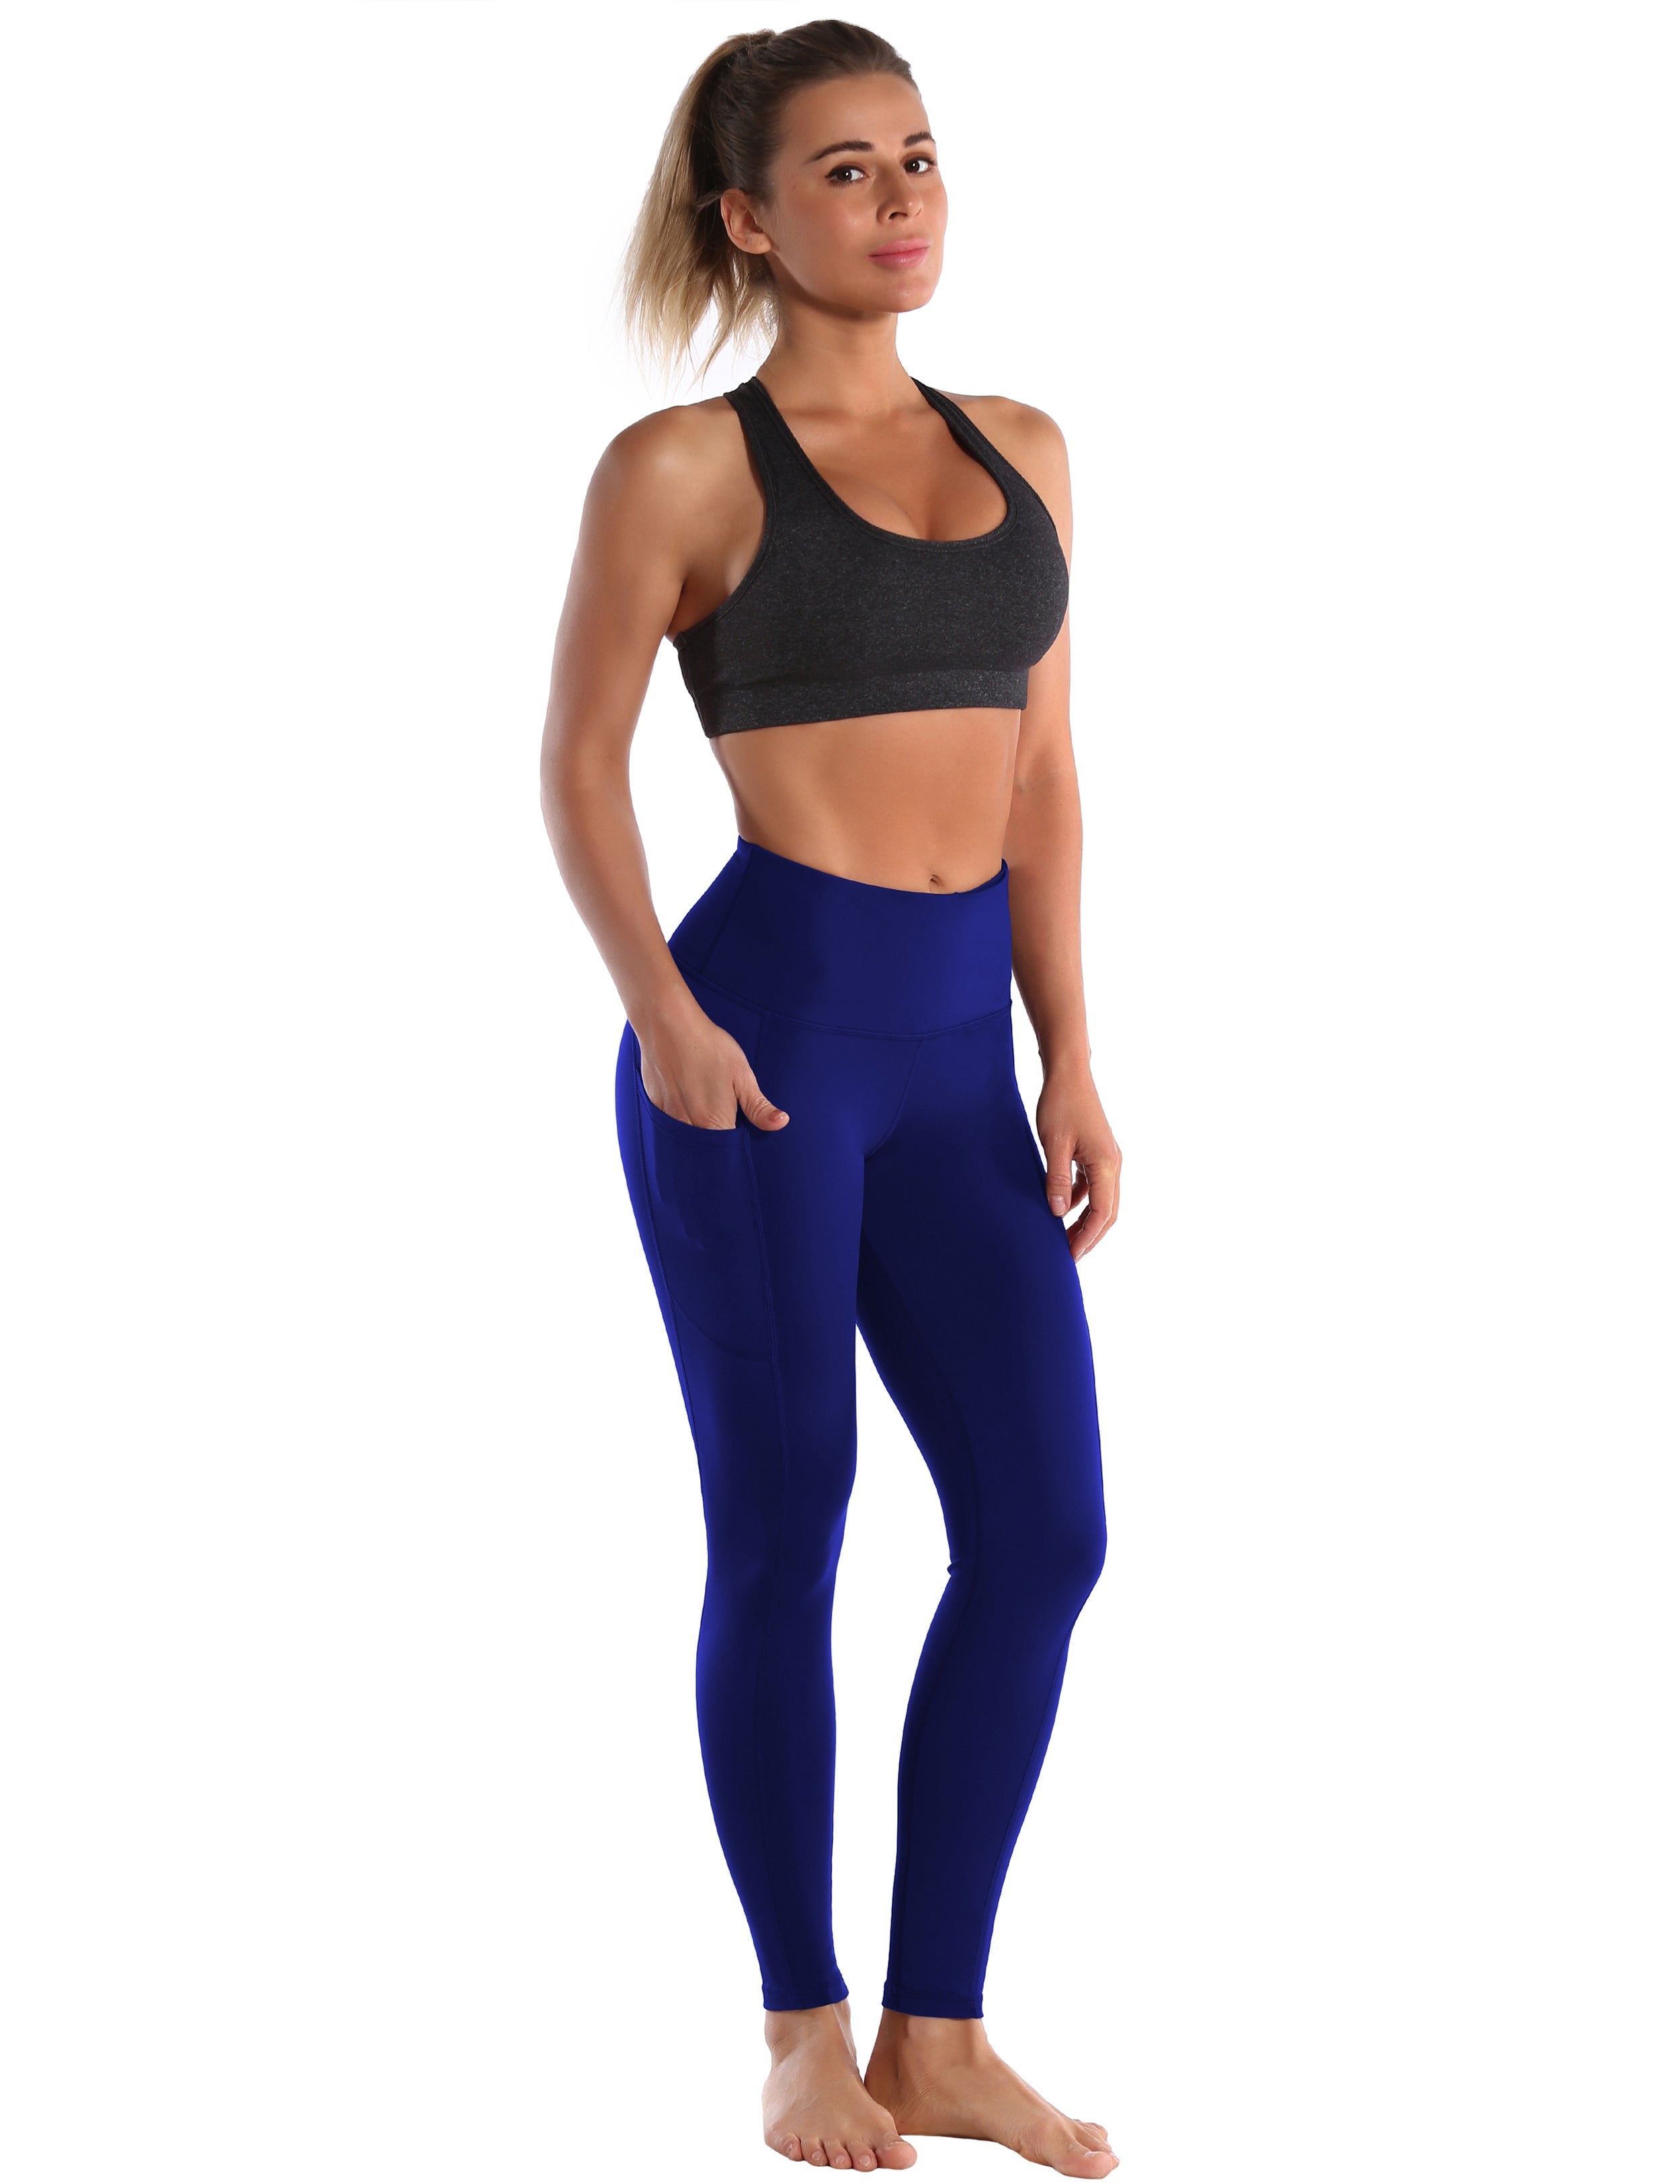 Hip Line Side Pockets Golf Pants navy Sexy Hip Line Side Pockets 75%Nylon/25%Spandex Fabric doesn't attract lint easily 4-way stretch No see-through Moisture-wicking Tummy control Inner pocket Two lengths